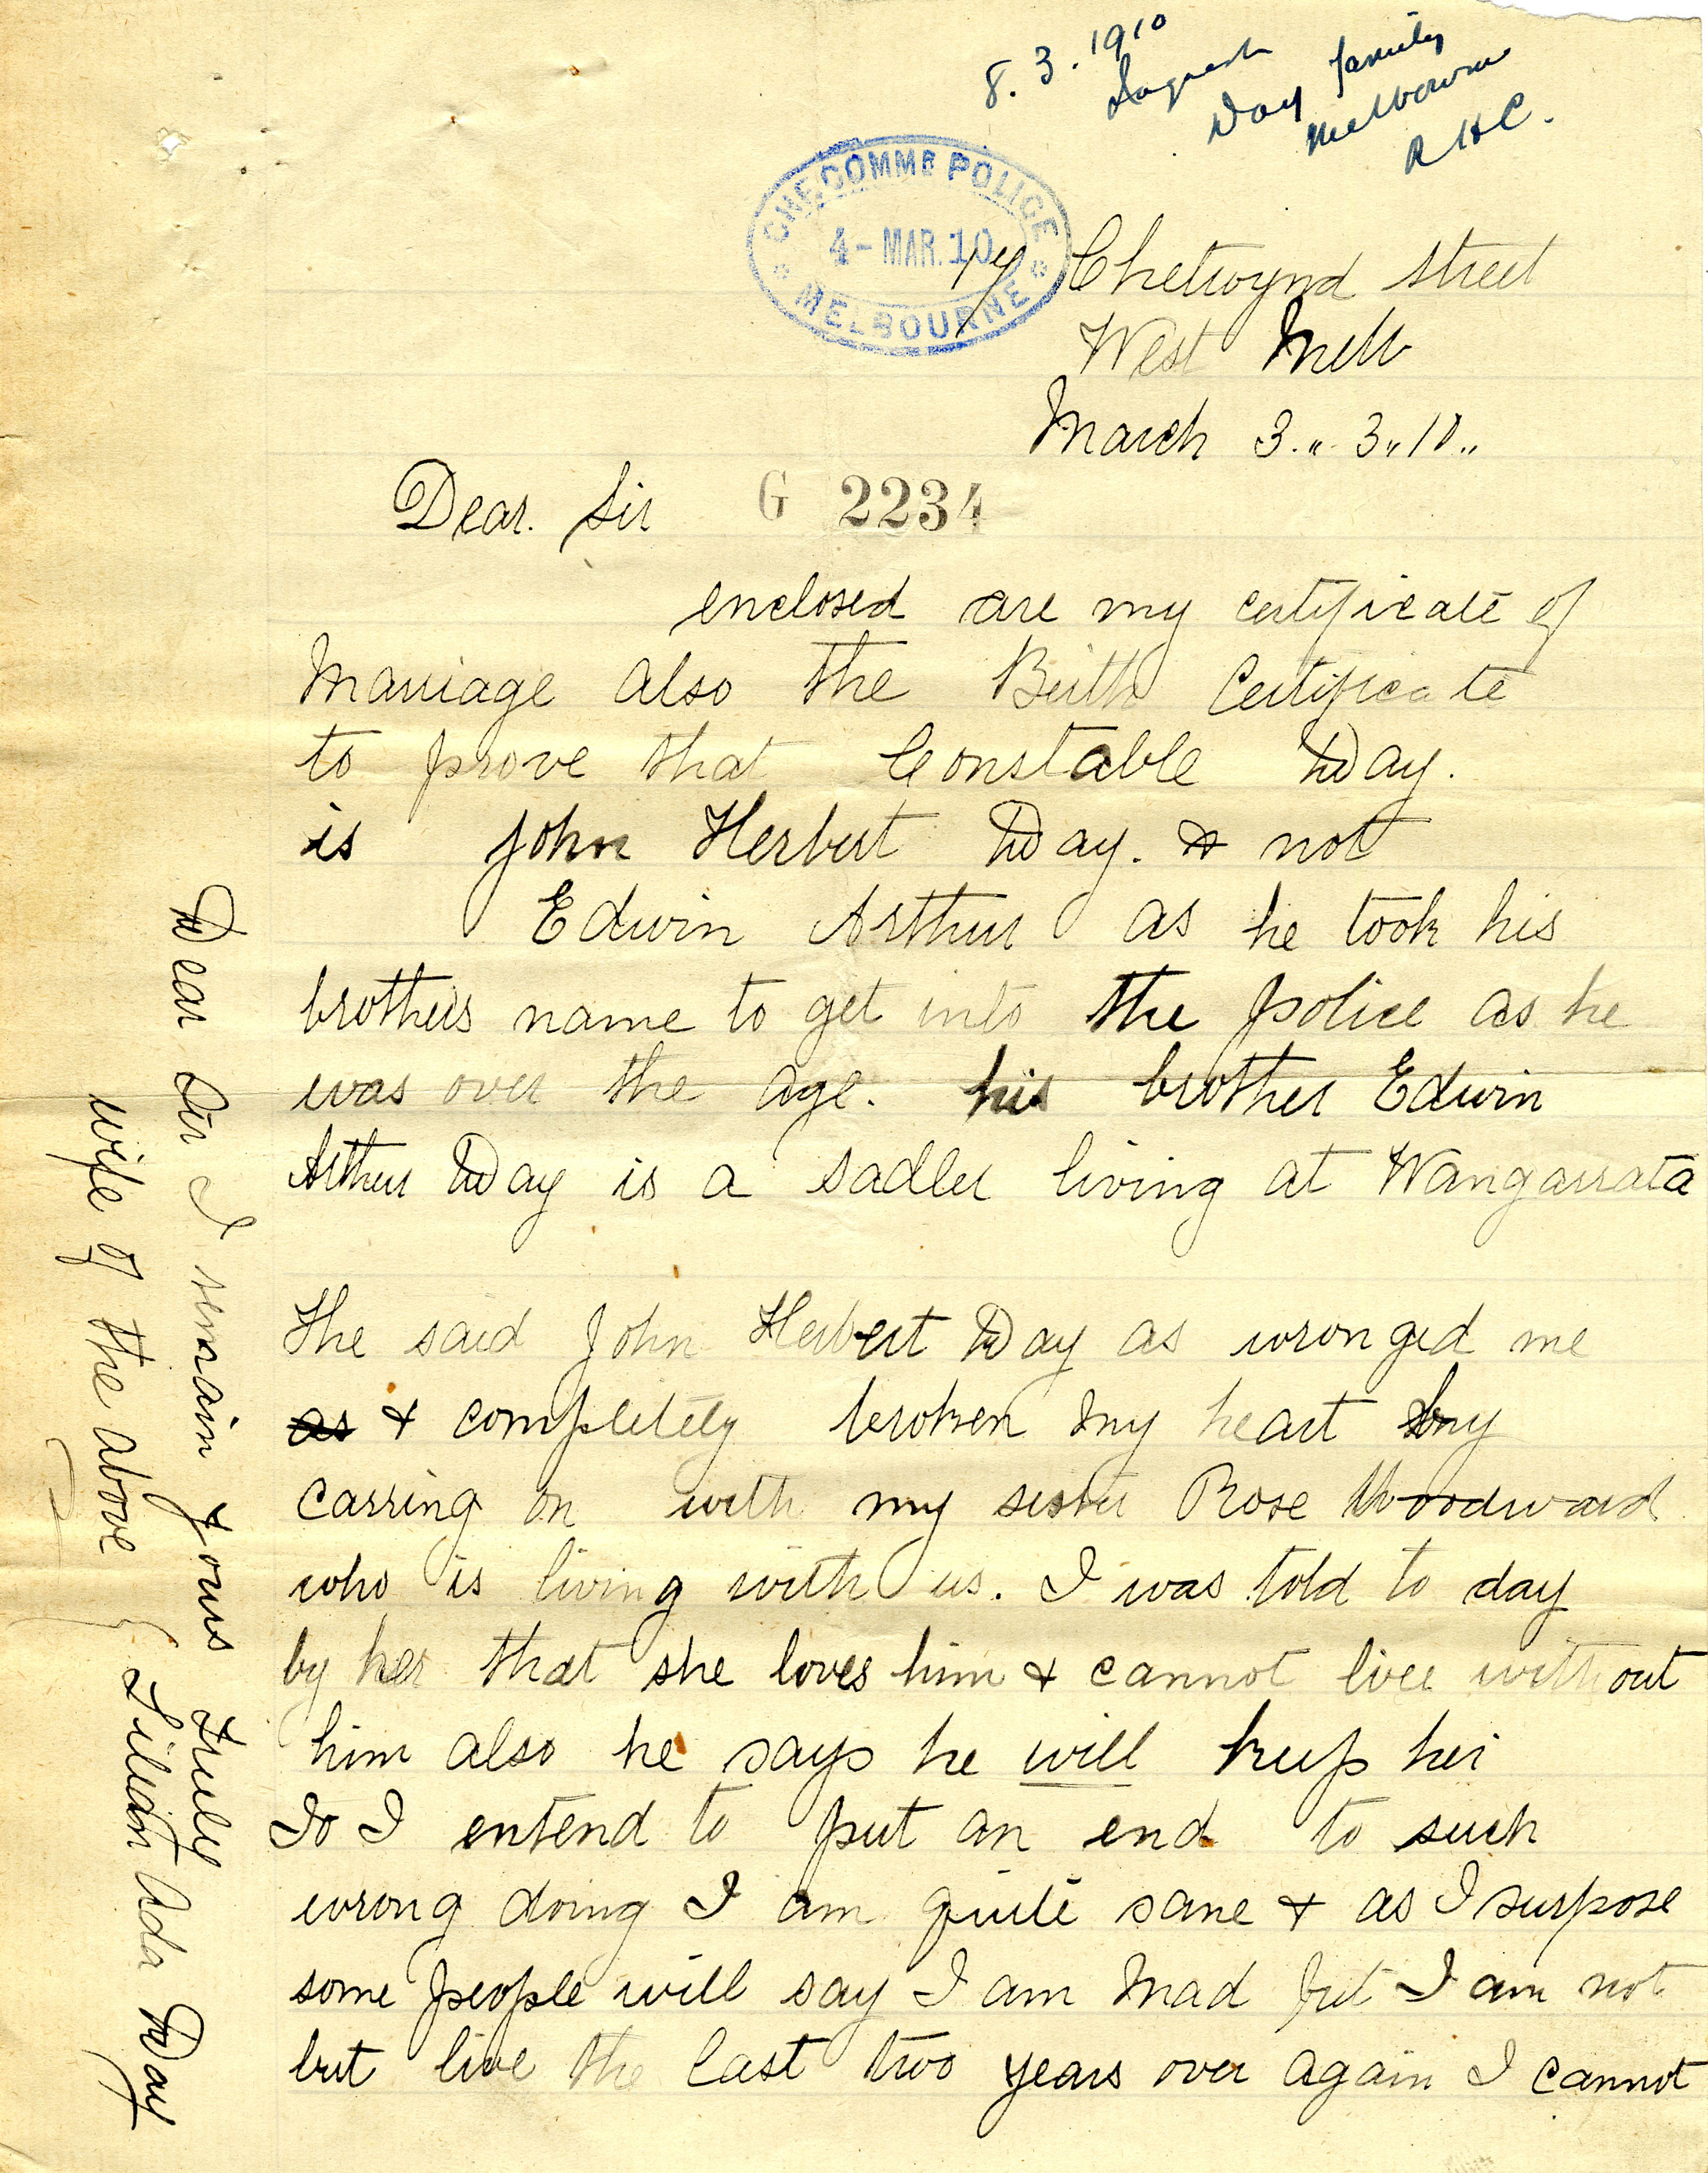 Revenge-laden letter written by Lilian Day to expose her husband’s falsified entry to the Victorian police force.